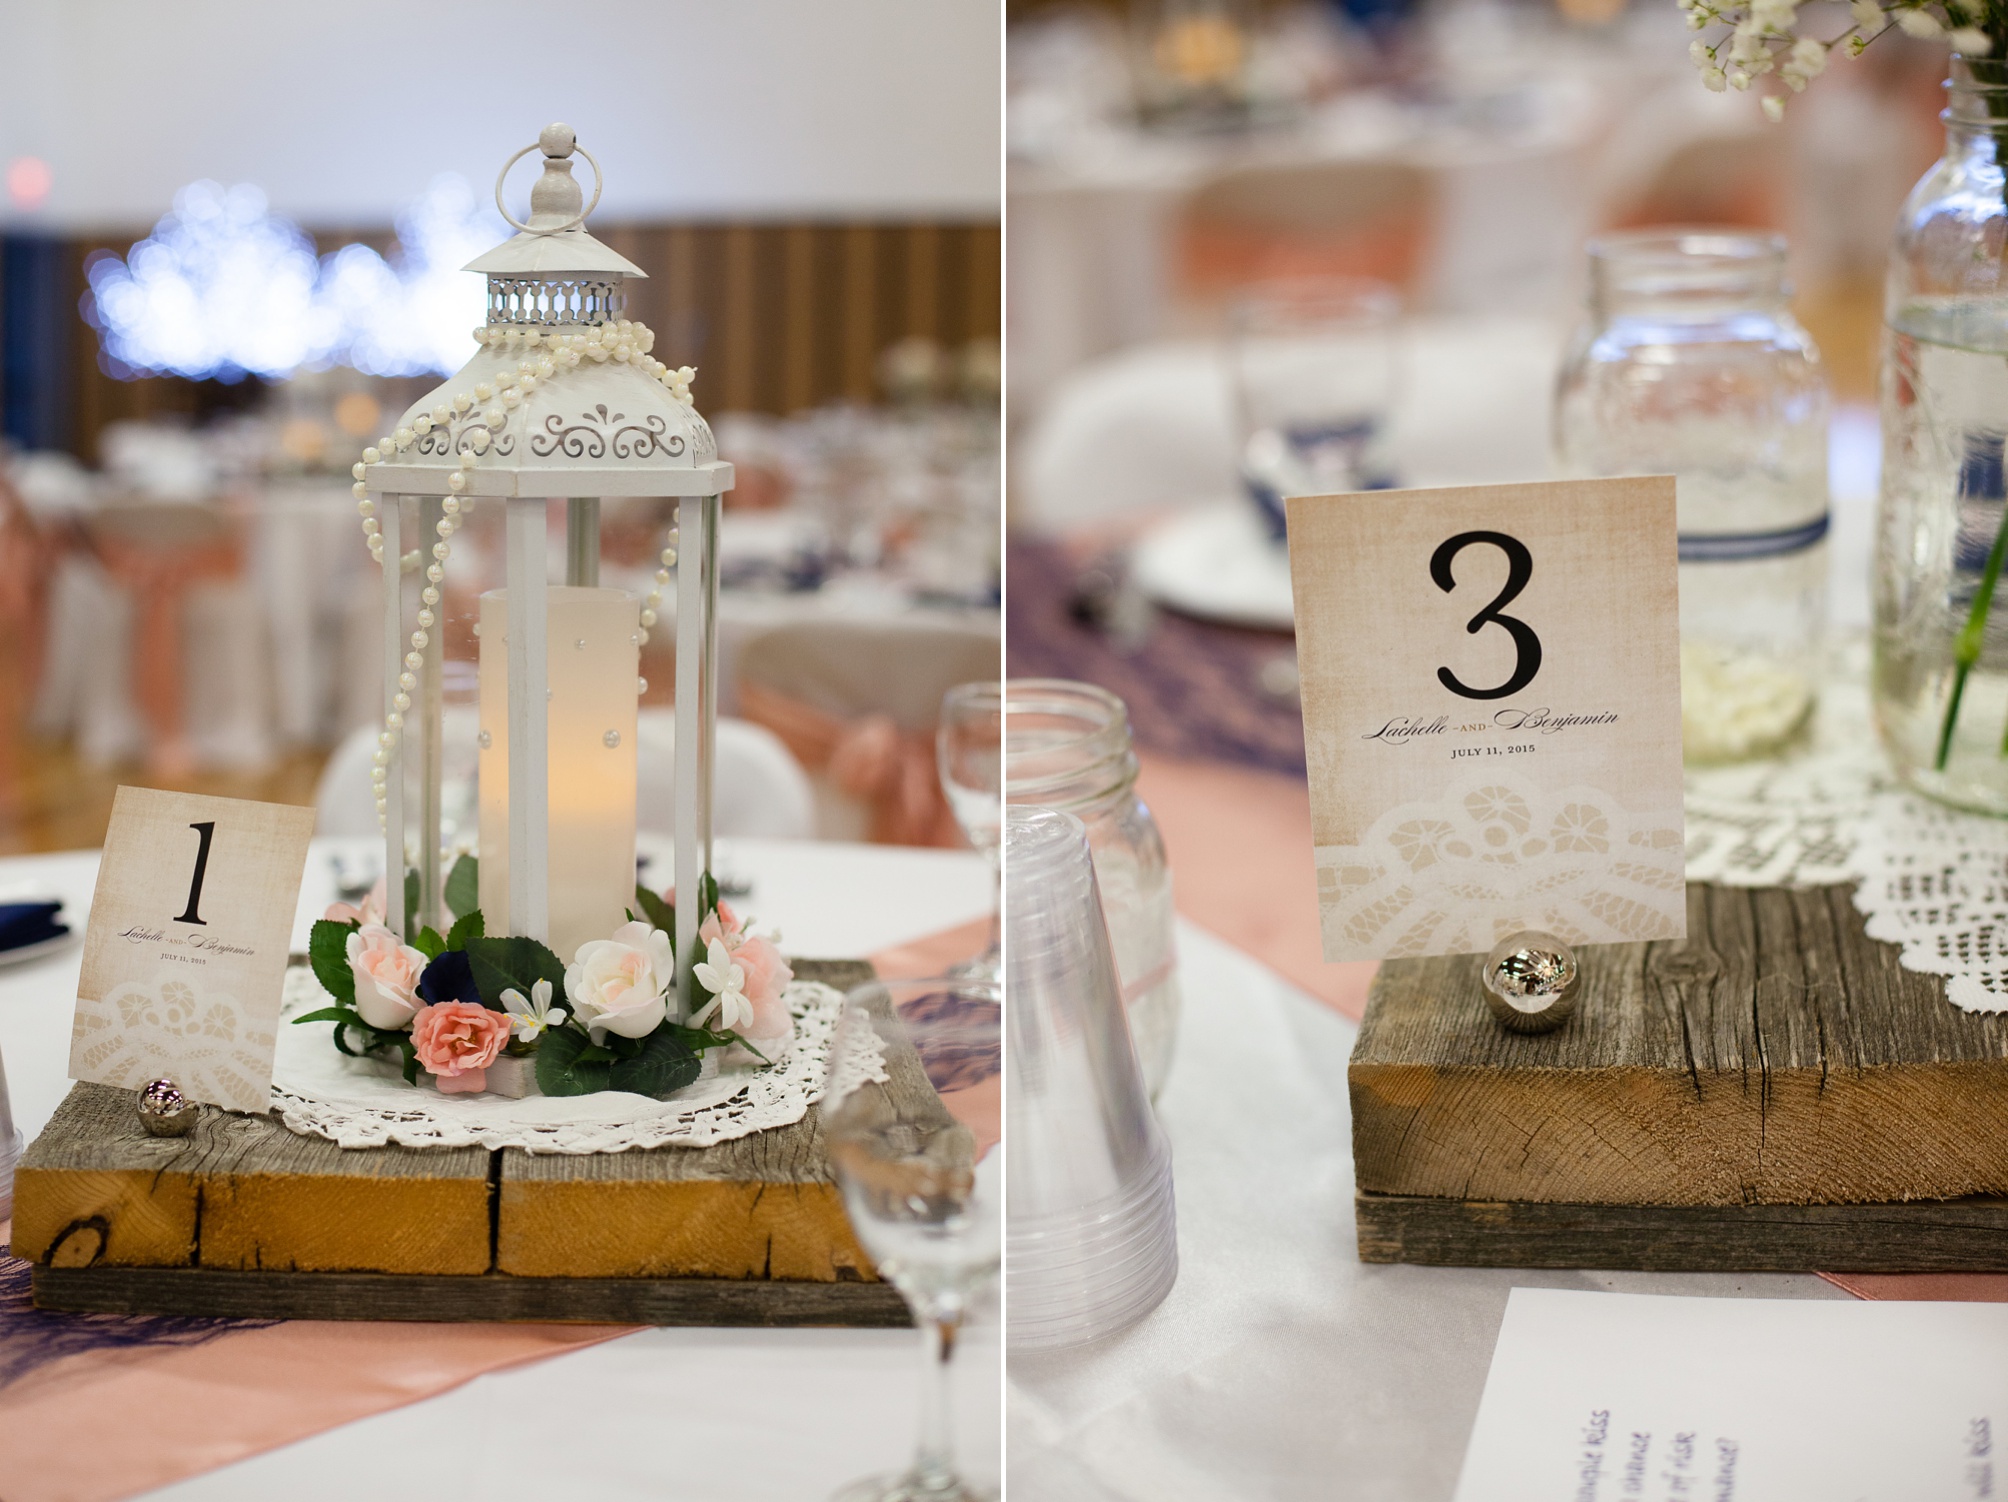 Ben and Lachelle's classy blush pink and navy blue summer wedding at the Taber Community Centre.